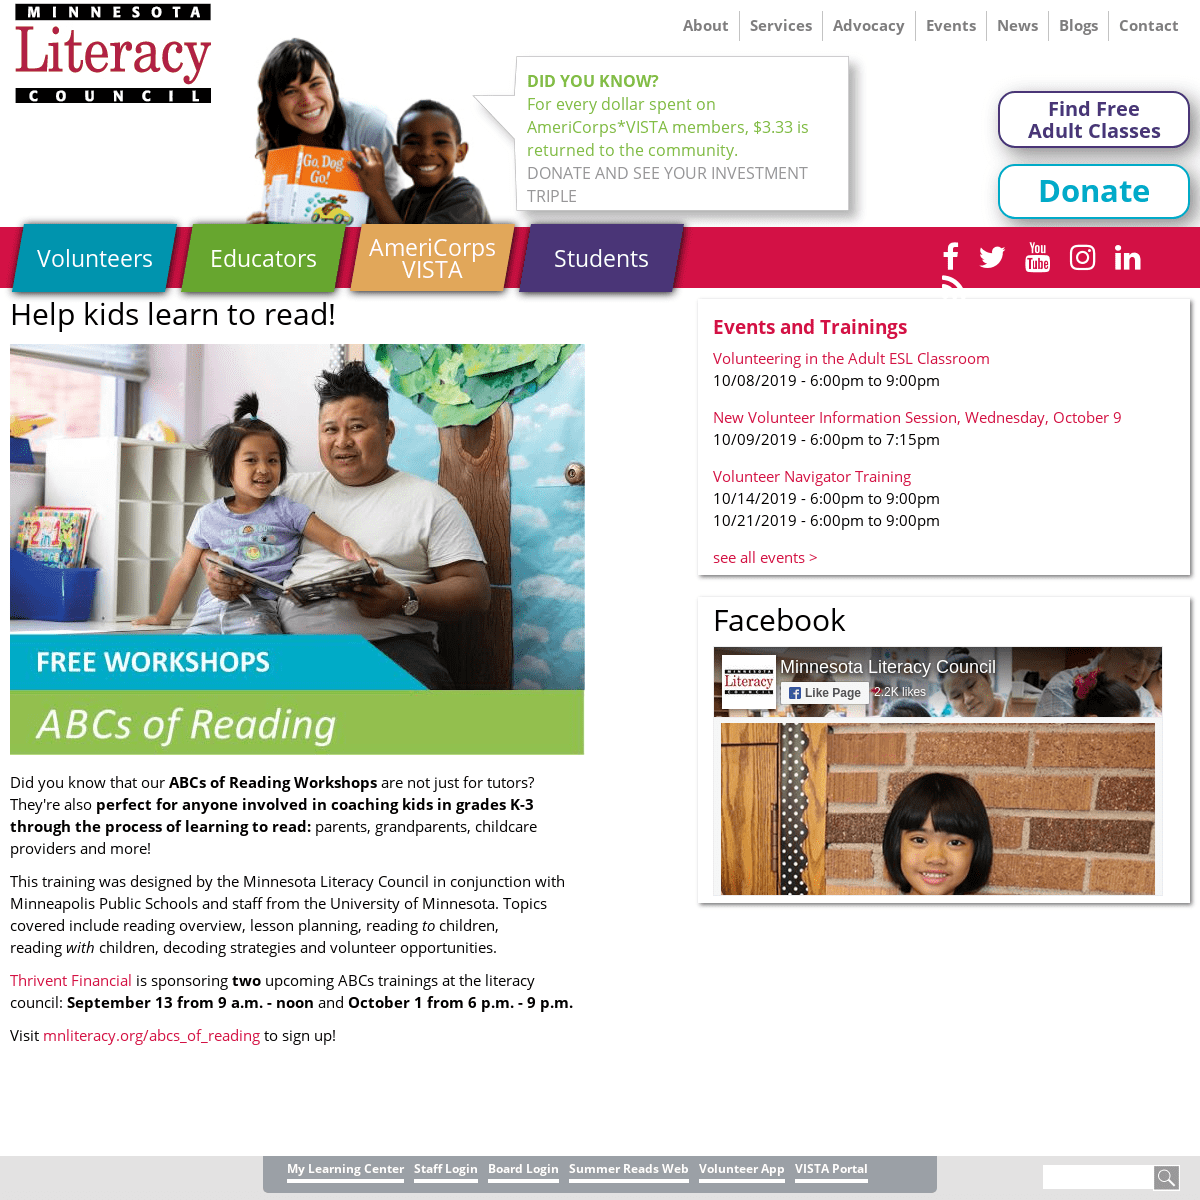 A complete backup of mnliteracy.org